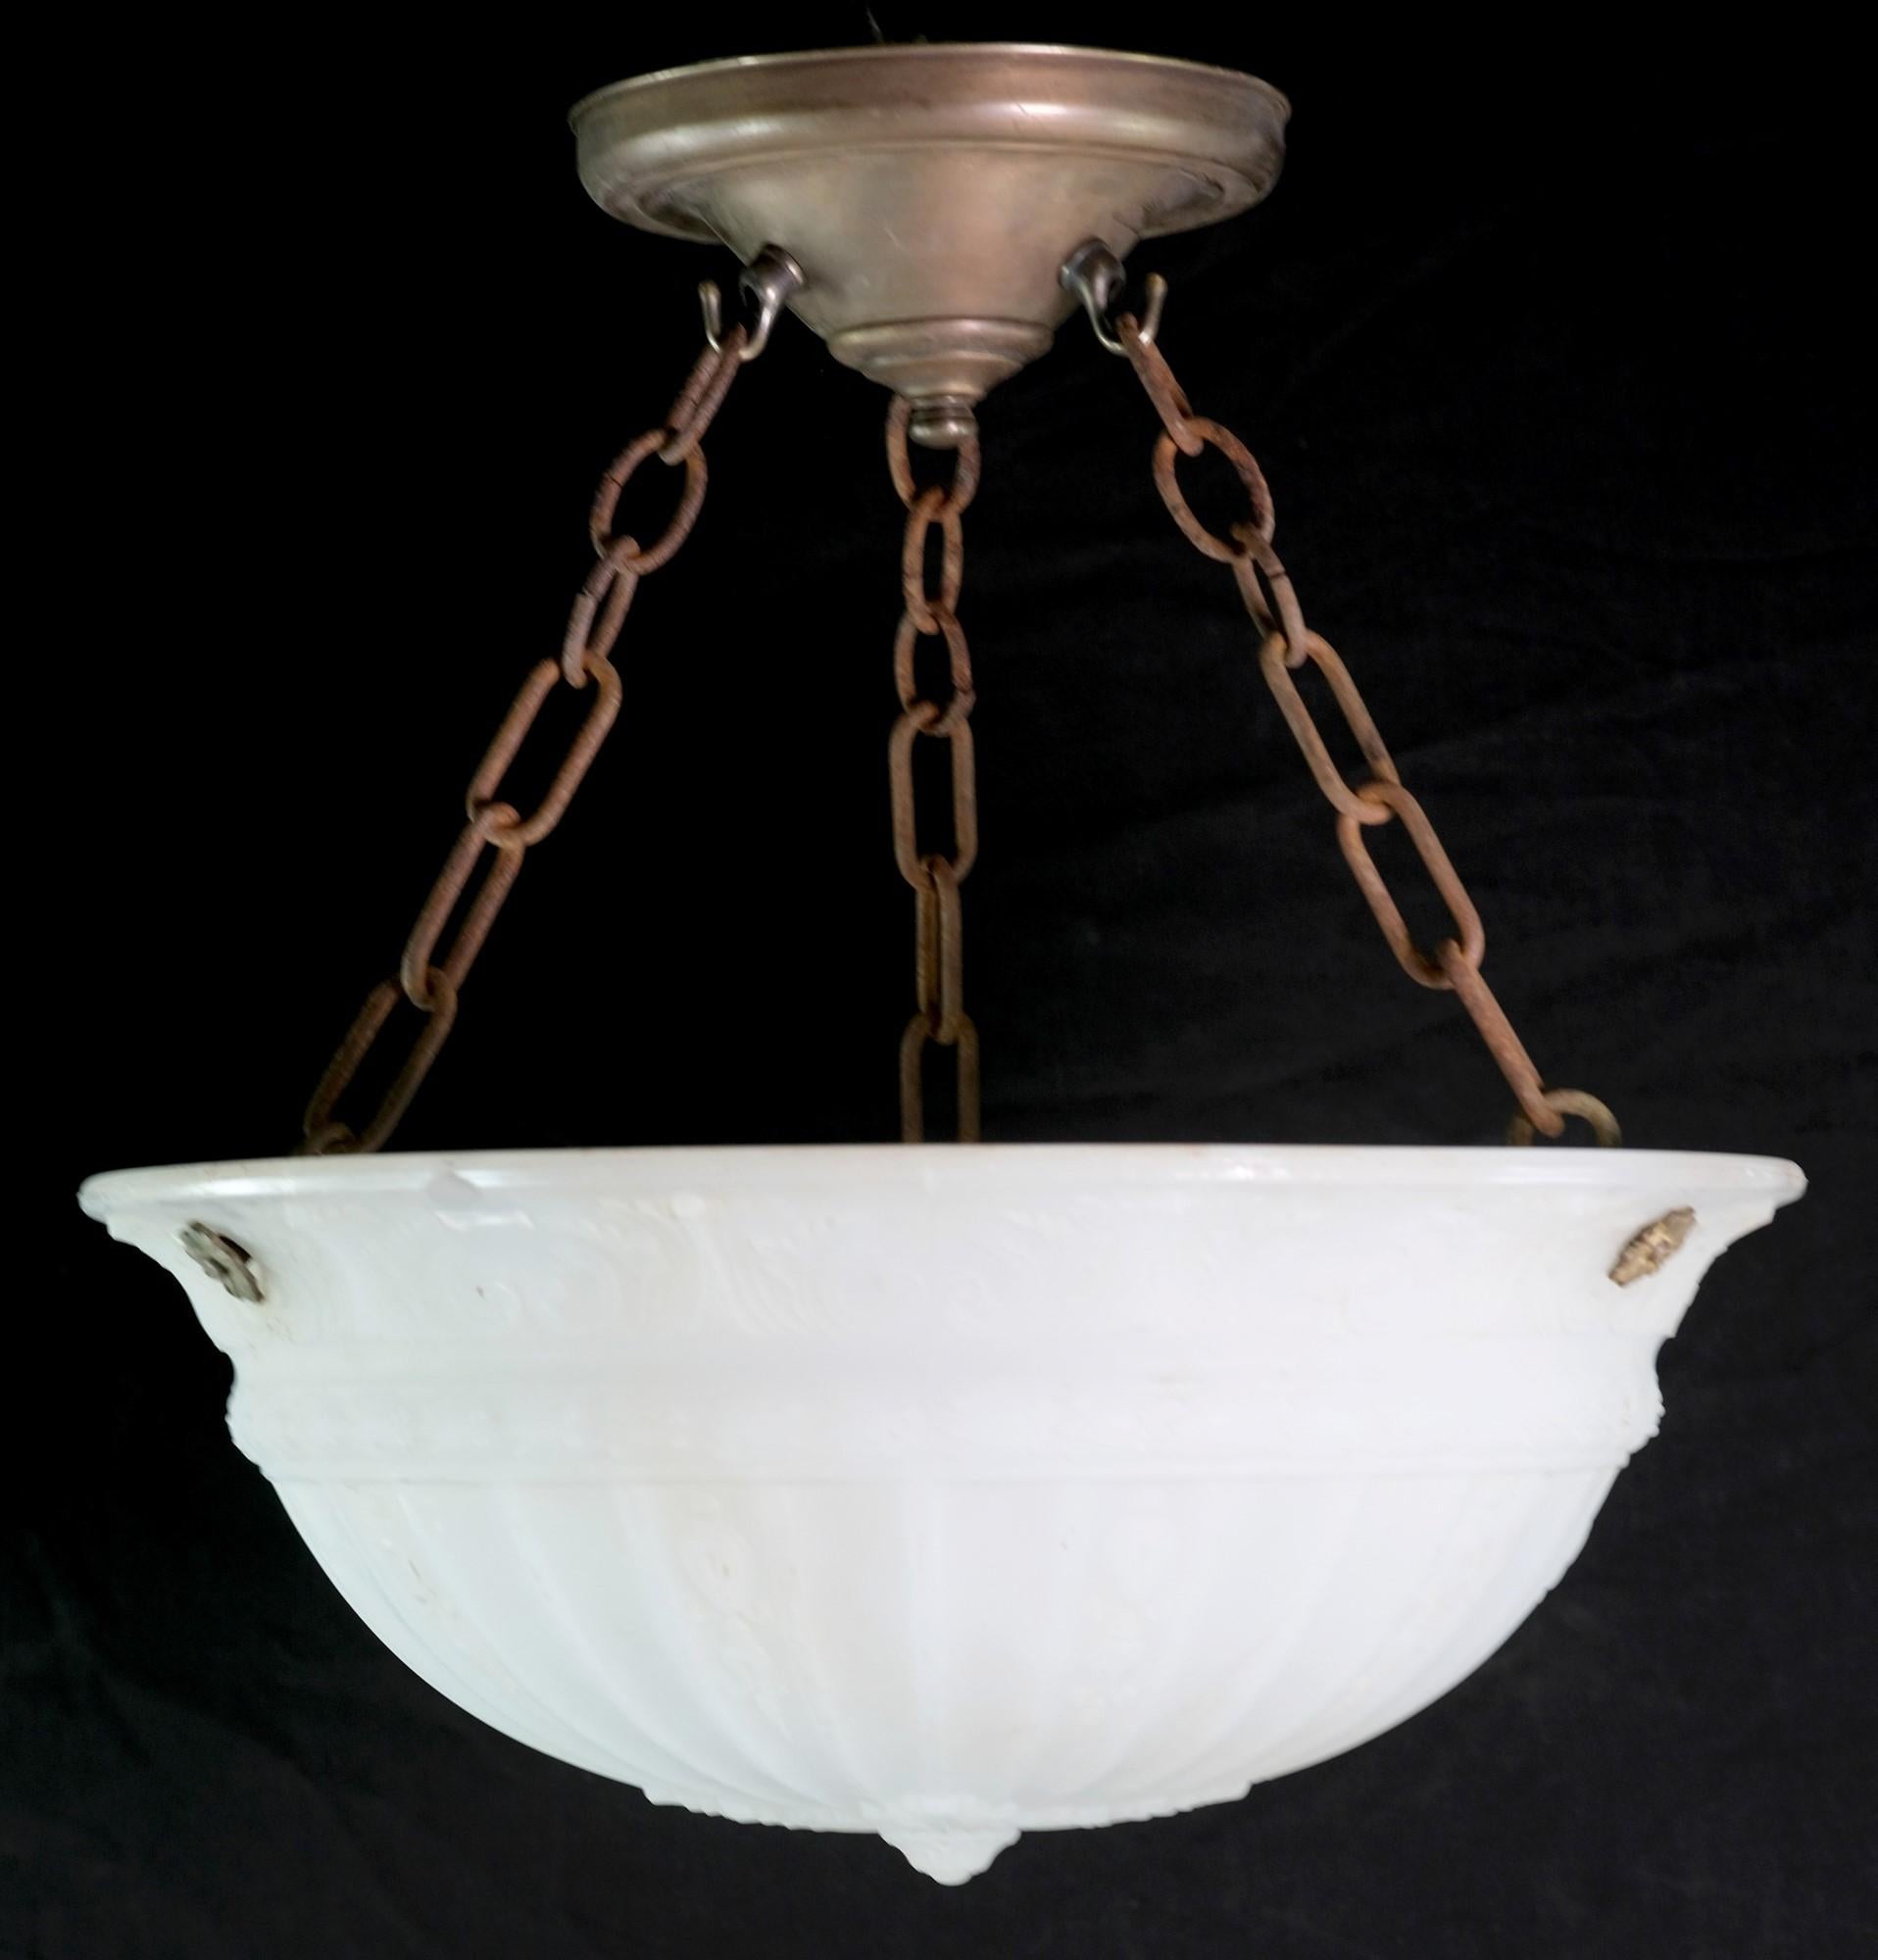 Early 20th century dish pendant light featuring a cast white shade ornate foliage detail. Minor chips in the glass. Pictured with brass and iron hardware with a rusted patina. Ornate floral rossettes. Cleaned and rewired. Small quantity available at